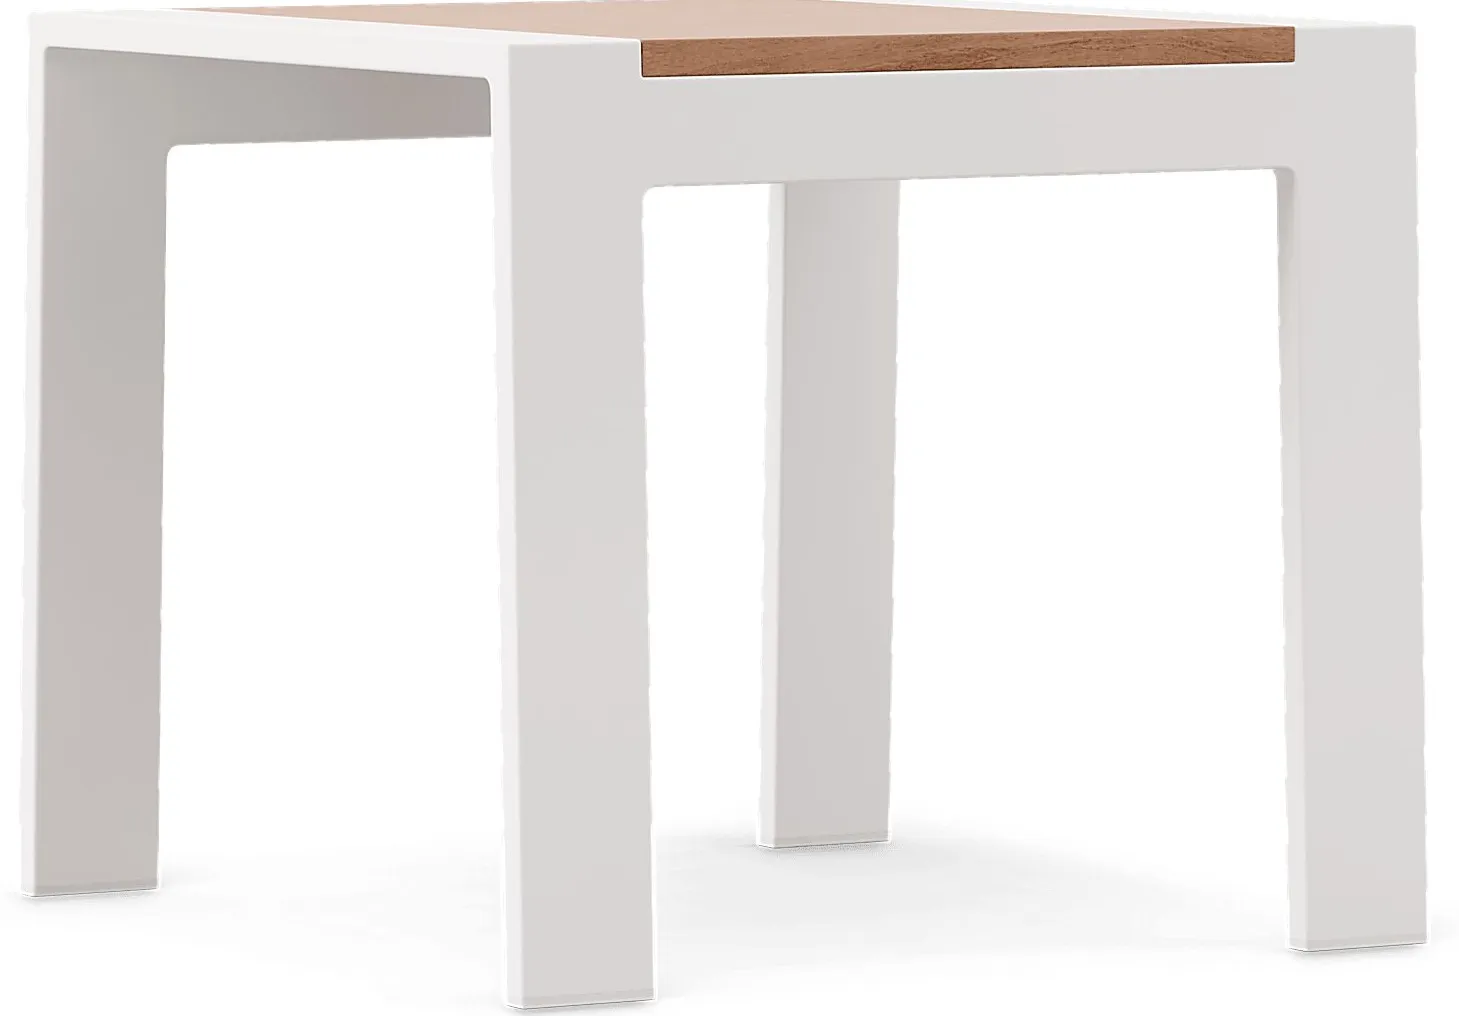 Solana White Outdoor End Table with Teak Top